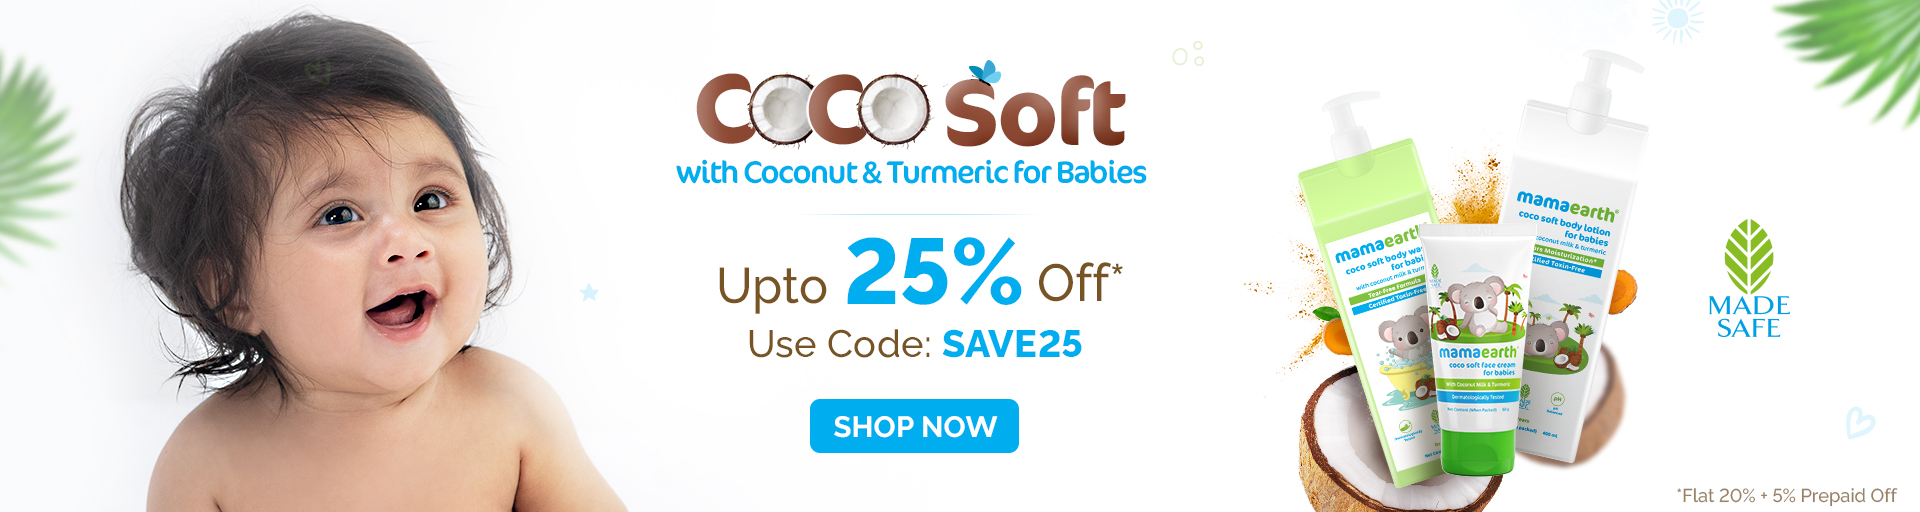 Mama Earth - Get Up to 25% OFF on Coco Soft Baby Skincare Range